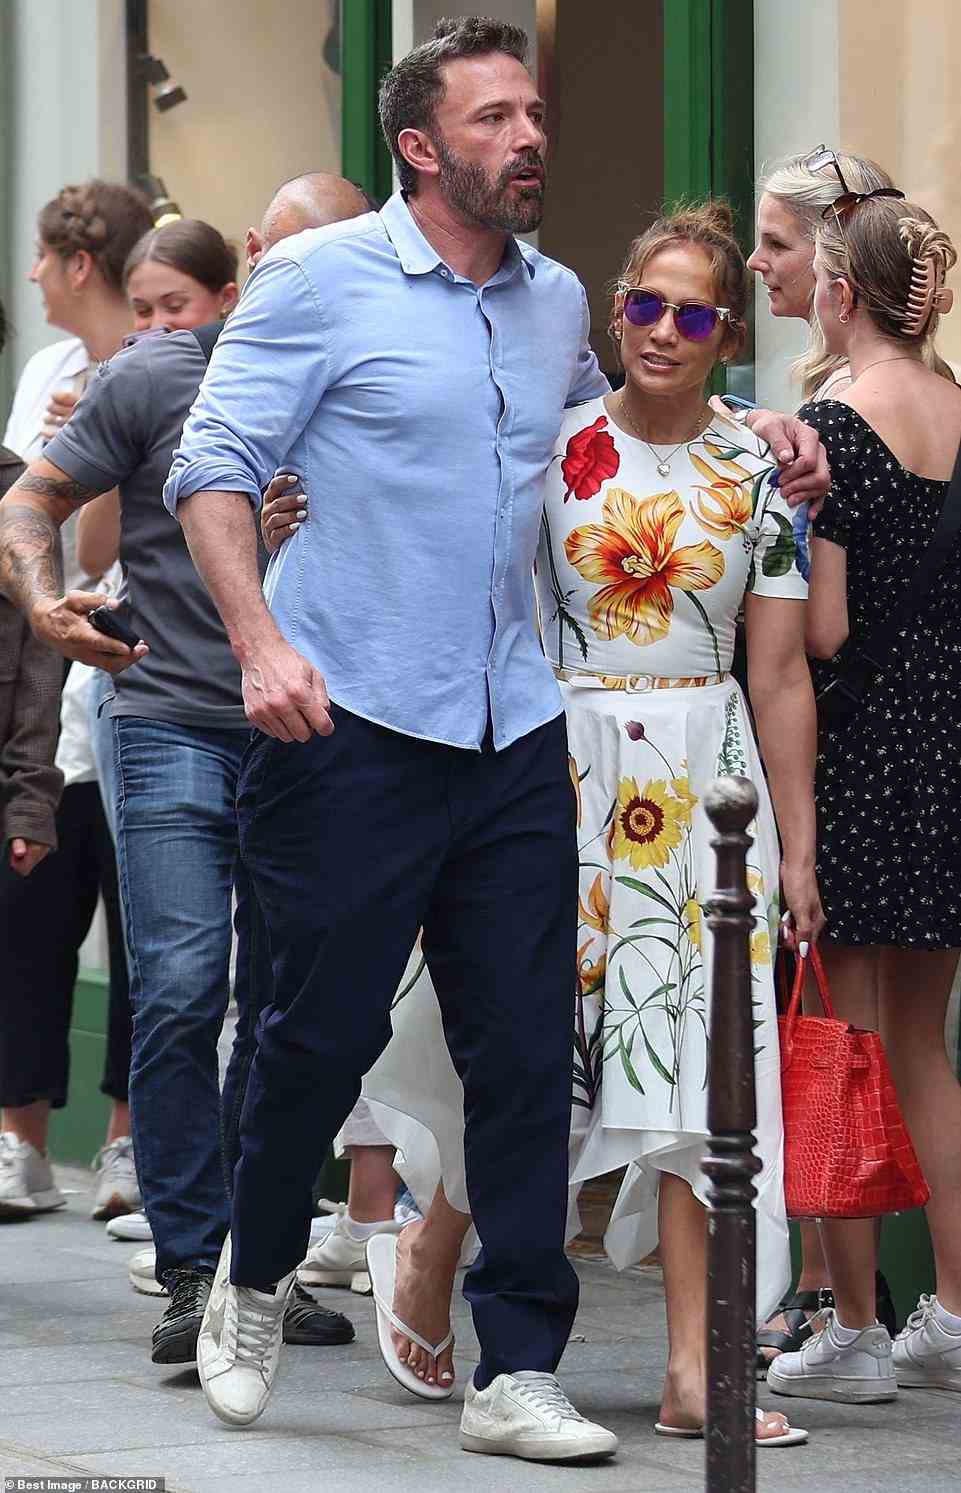 Later on in the day, she switched into a figure-hugging, $2,290 Oscar de la Renta floral midi dress, while exploring the city with Affleck, who wore a blue top and dark dress pants